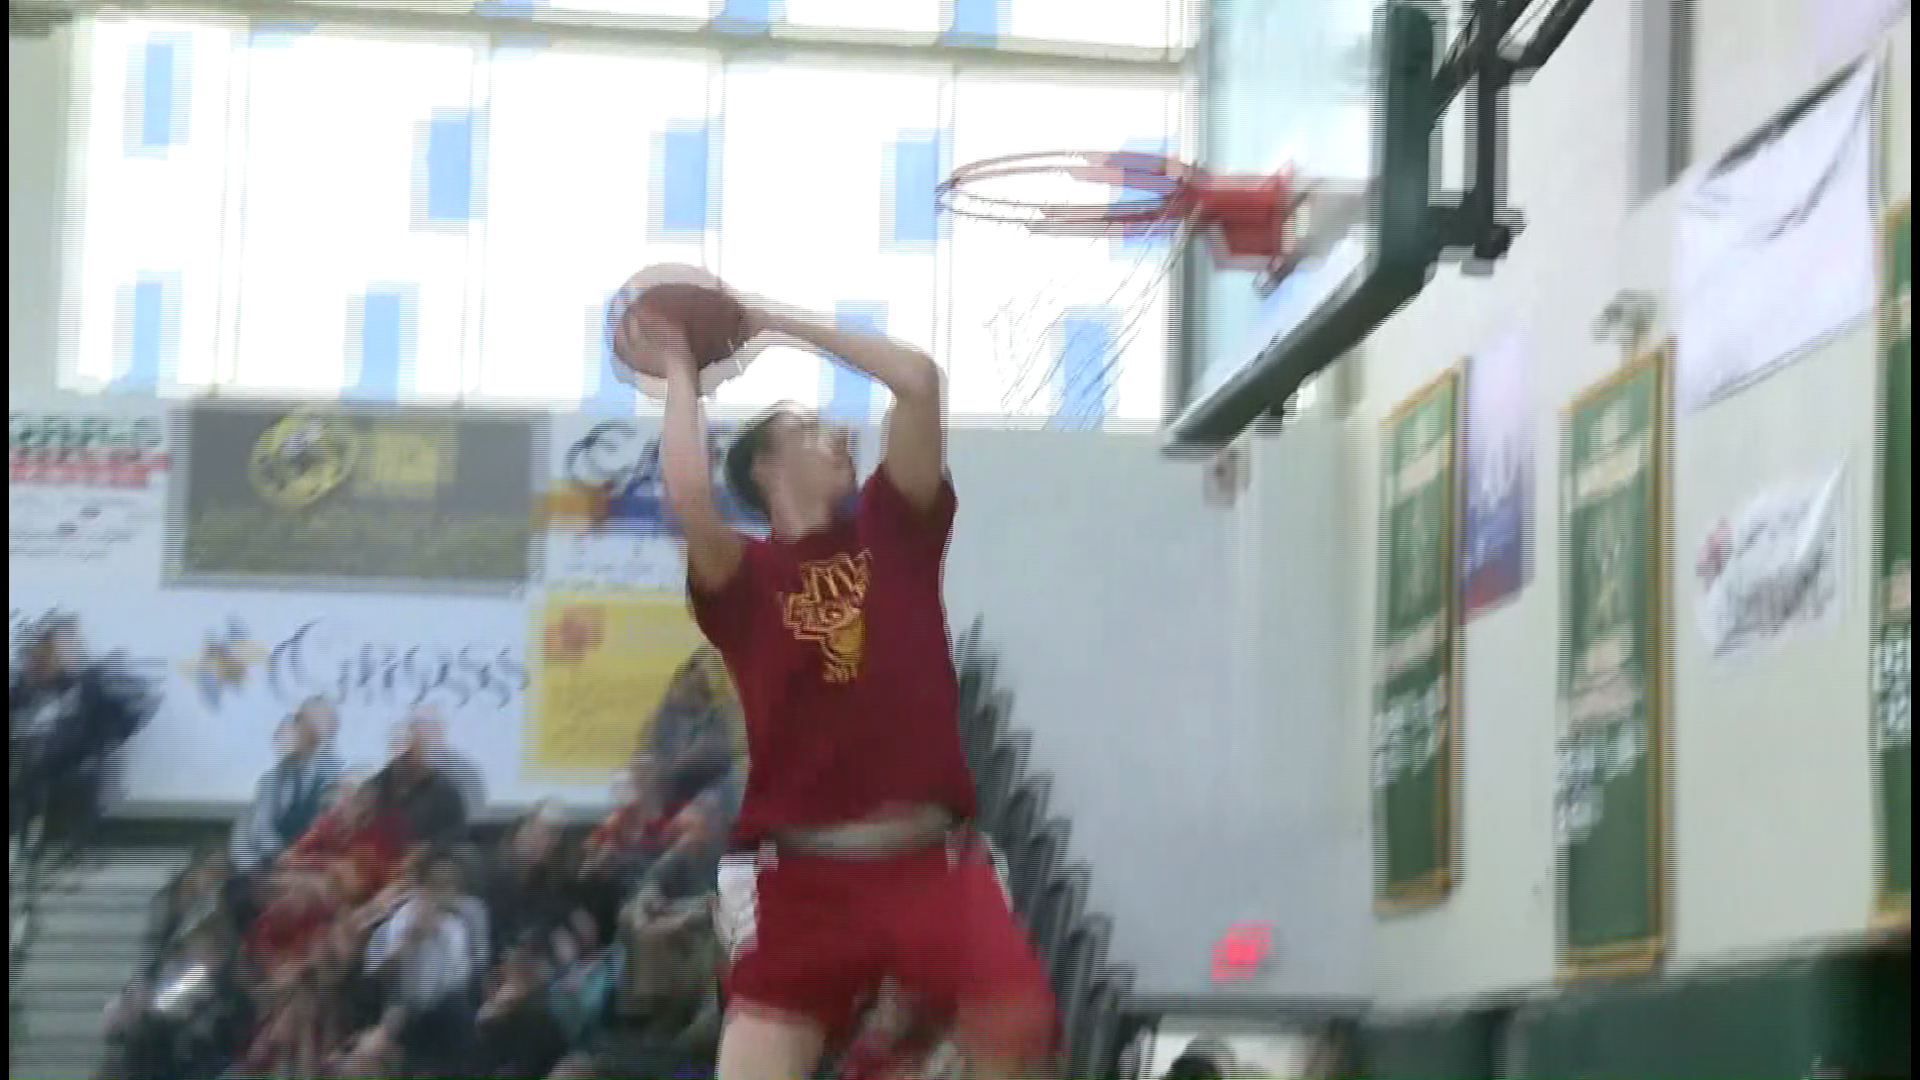 File: Nick Mayo competes in 2015 Maine dunk contest